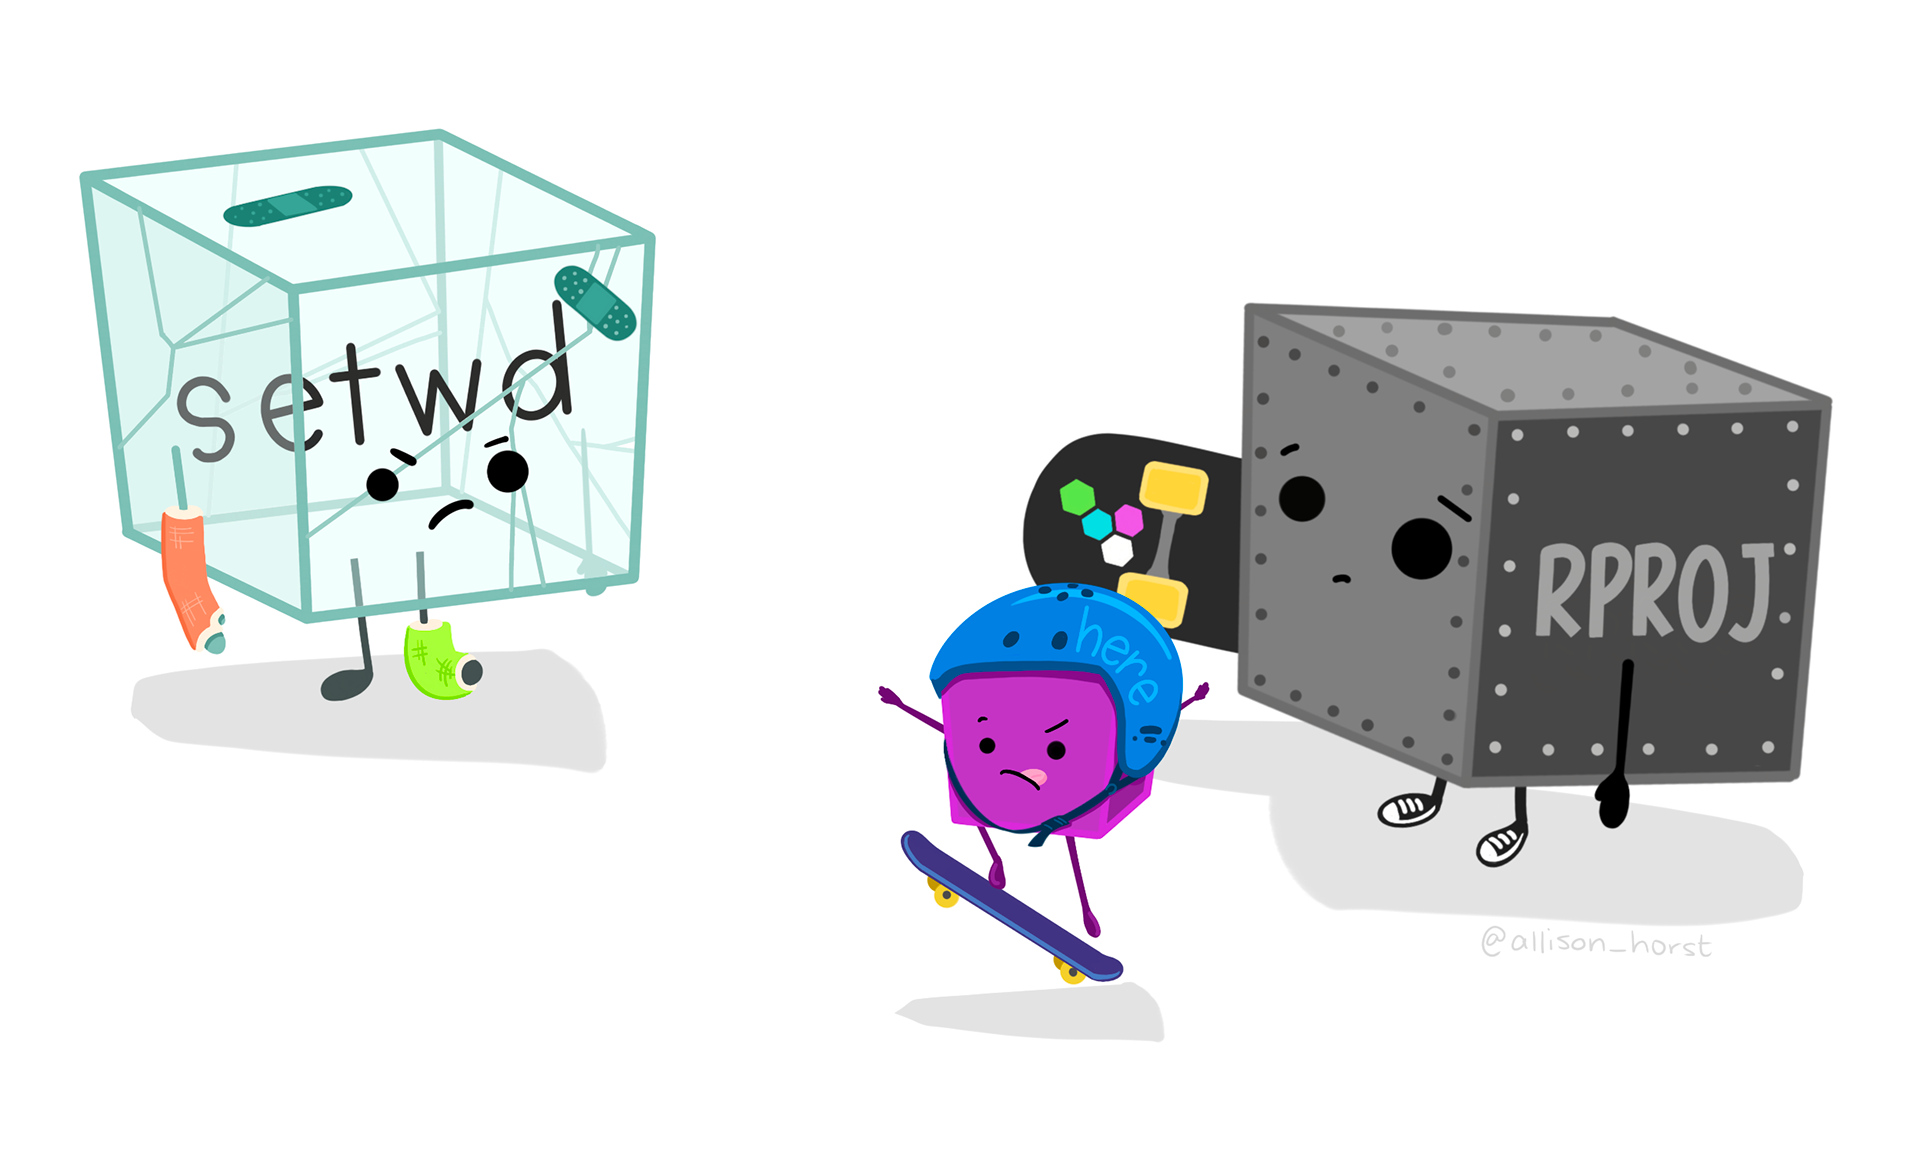 Artwork by Allison Horst. A cartoon of a cracked glass cube looking frustrated with casts on its arm and leg, with bandaids on it, containing “setwd,” looks on at a metal riveted cube labeled “R Proj” holding a skateboard looking sympathetic, and a smaller cube with a helmet on labeled “here” doing a trick on a skateboard.